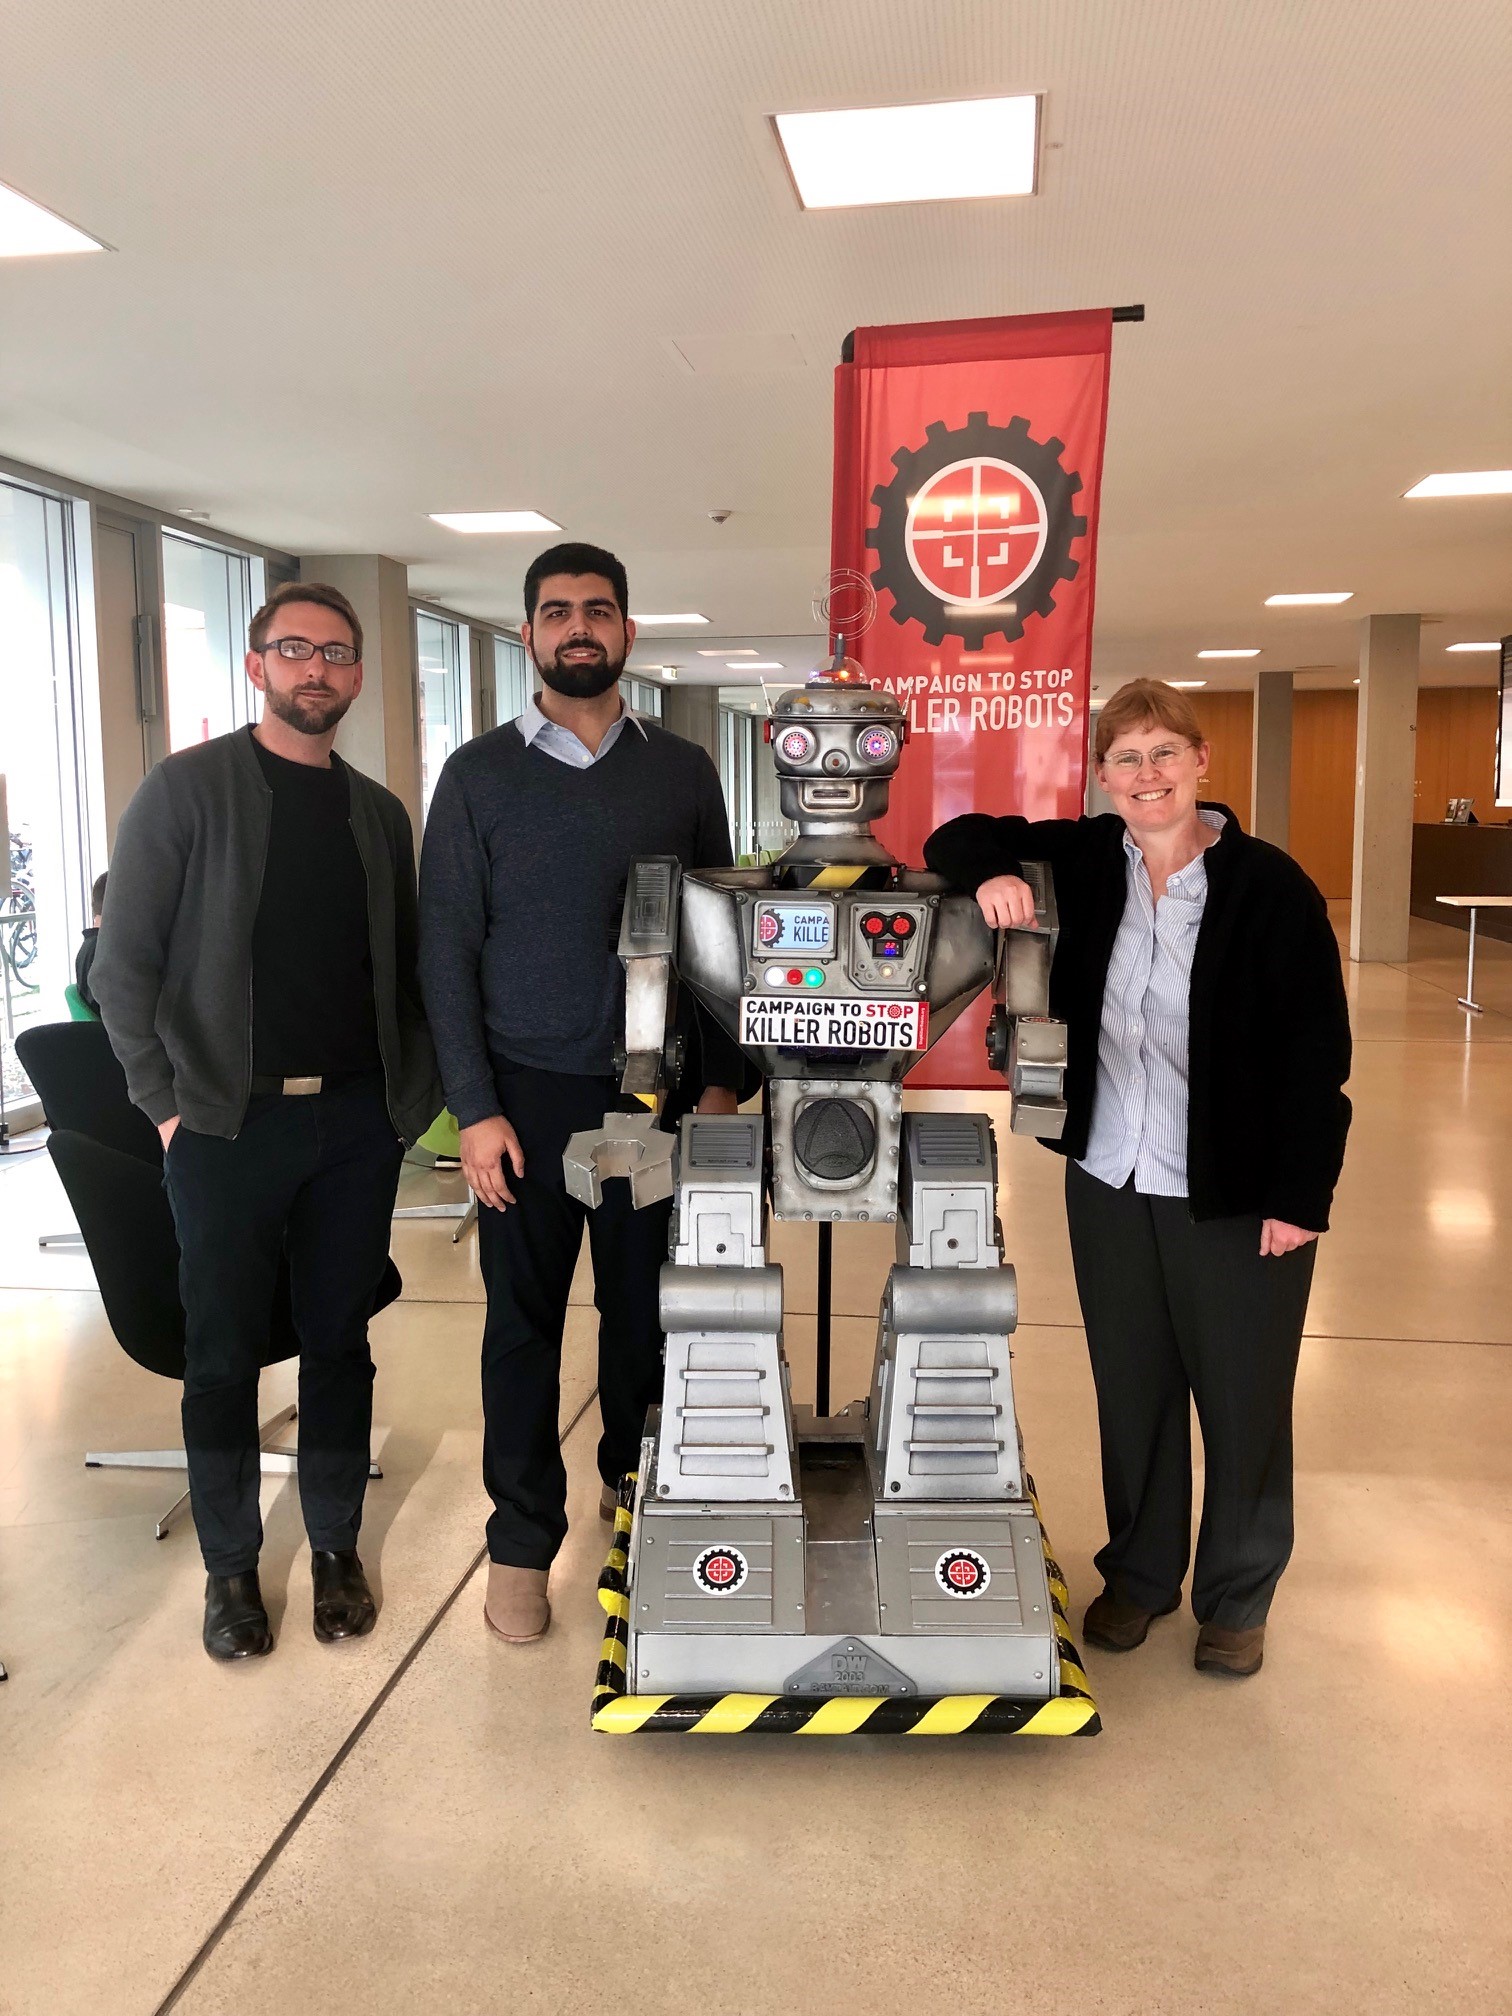 Three individuals pose with a life-size robot in front of a banner 